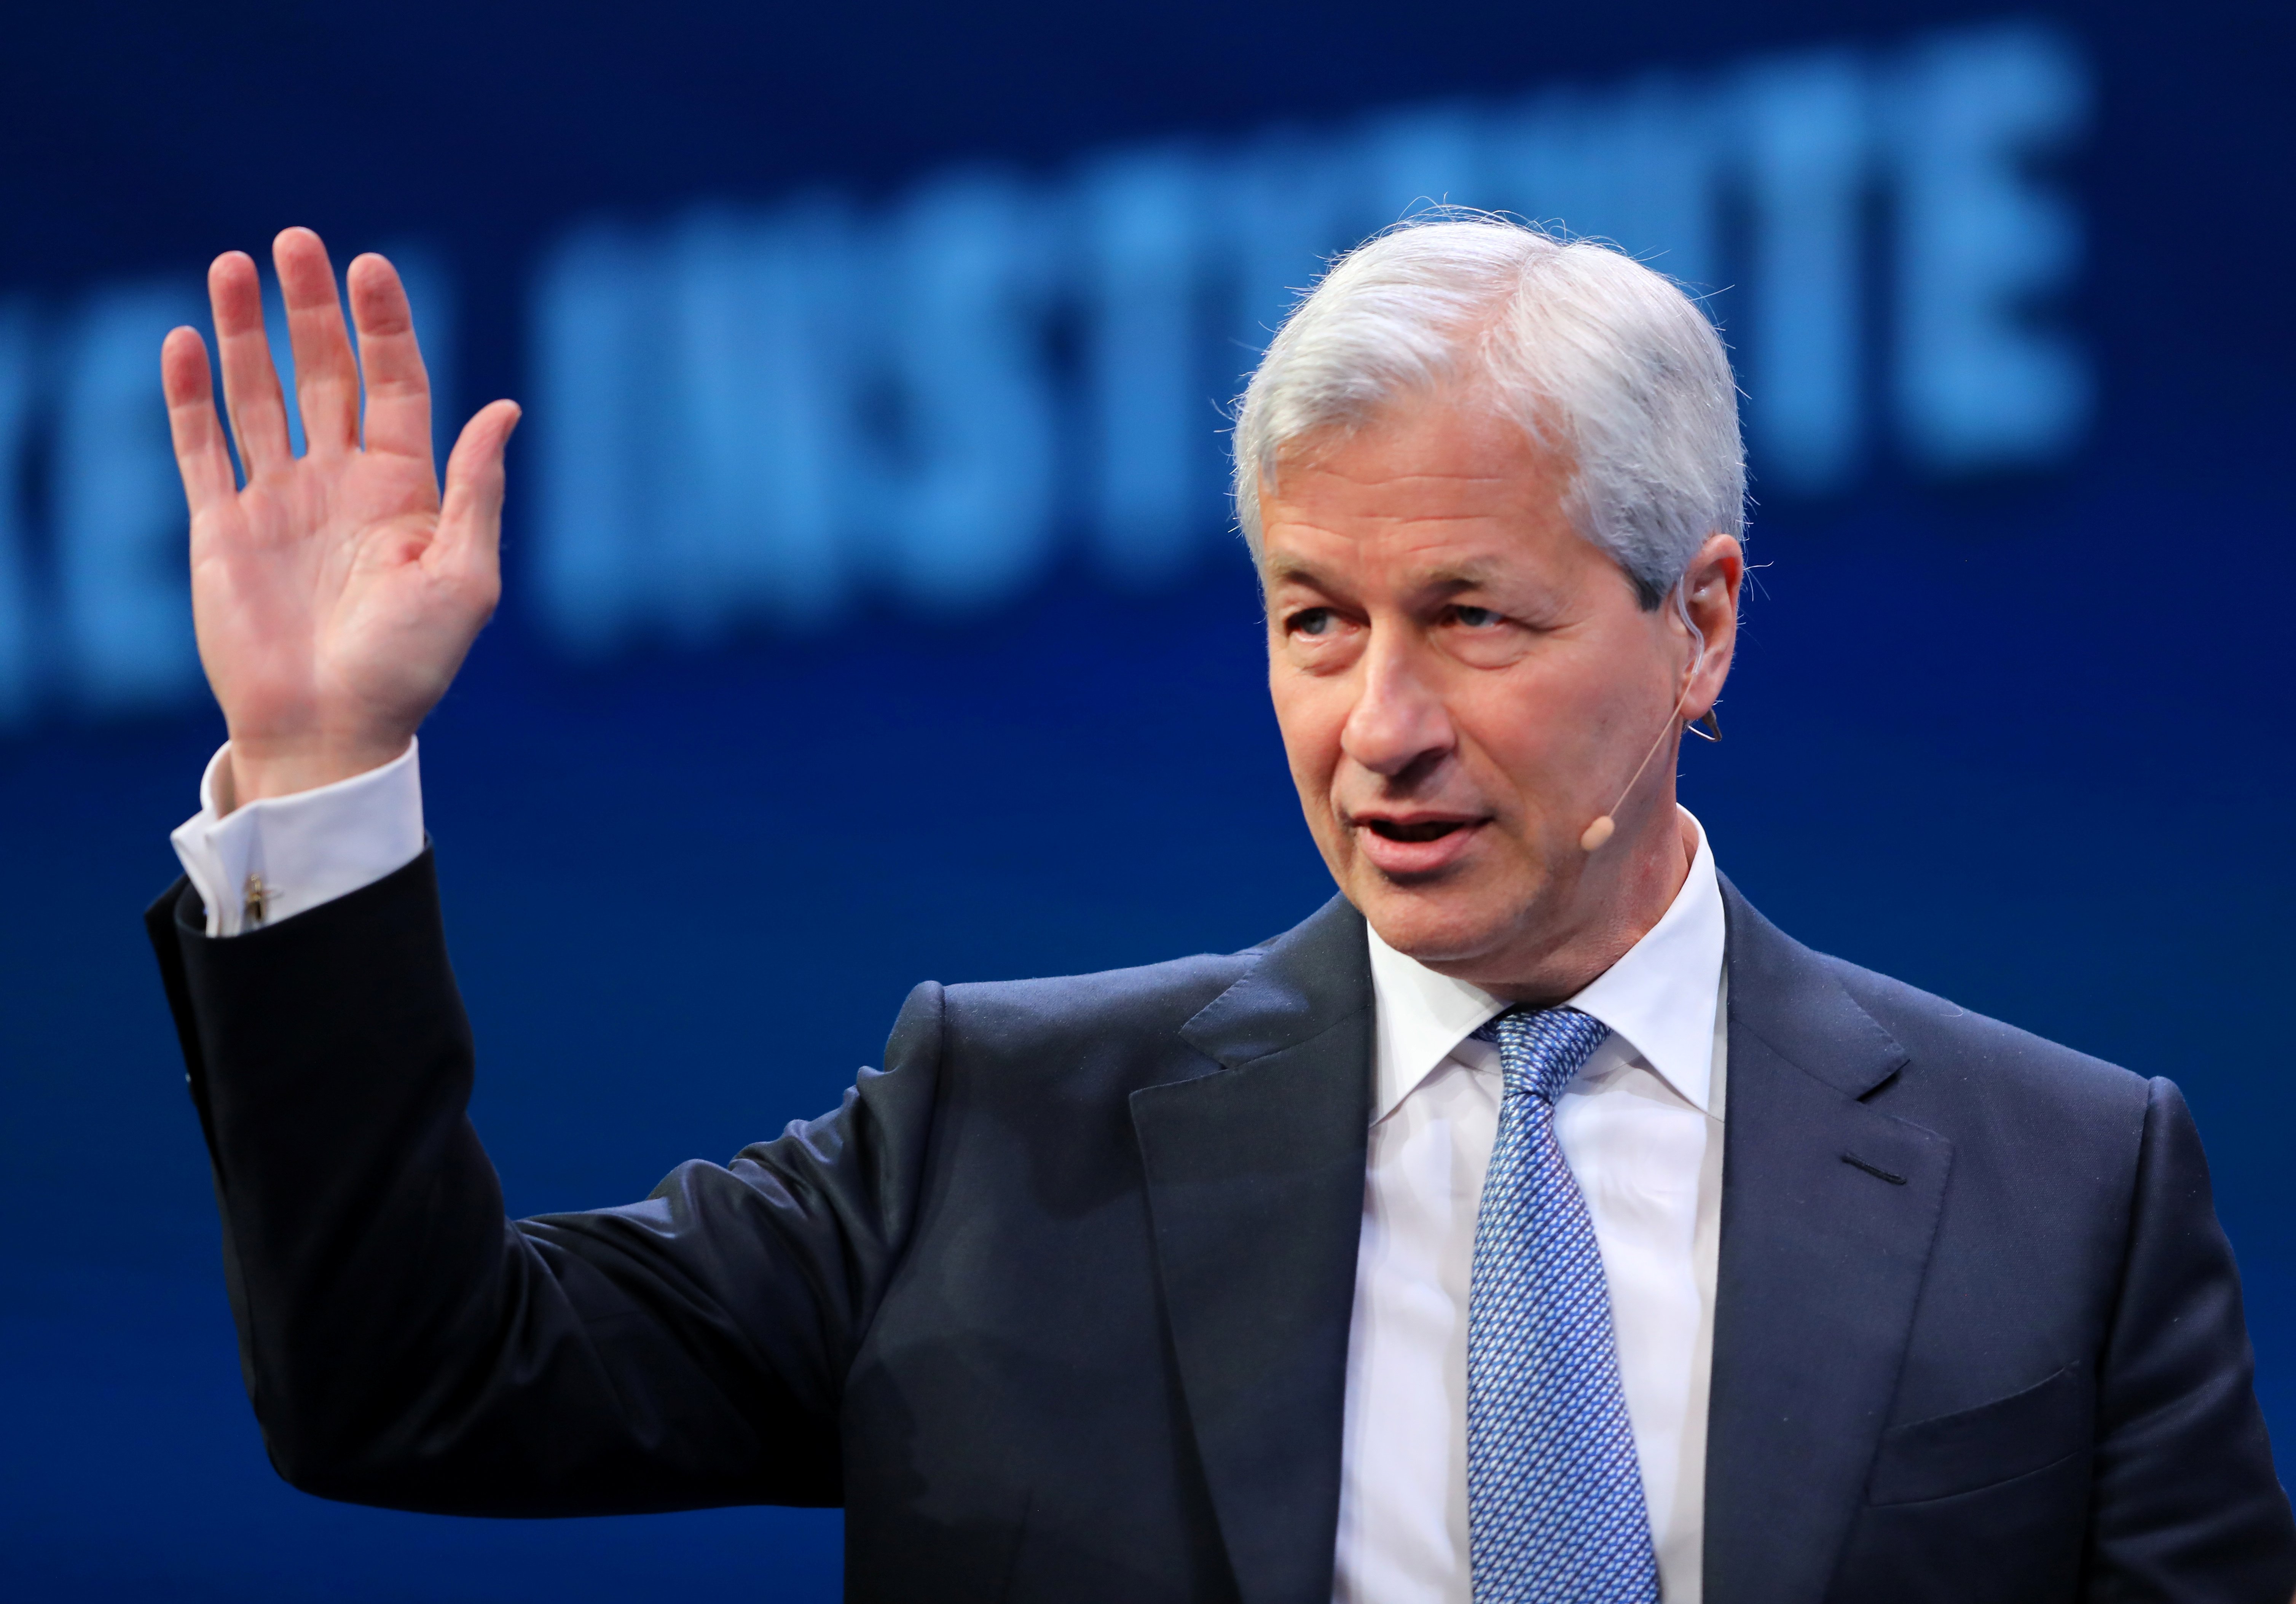 Jamie Dimon, Chairman and CEO of JPMorgan Chase & Co. speaks during the Milken Institute Global Conference in Beverly Hills, California